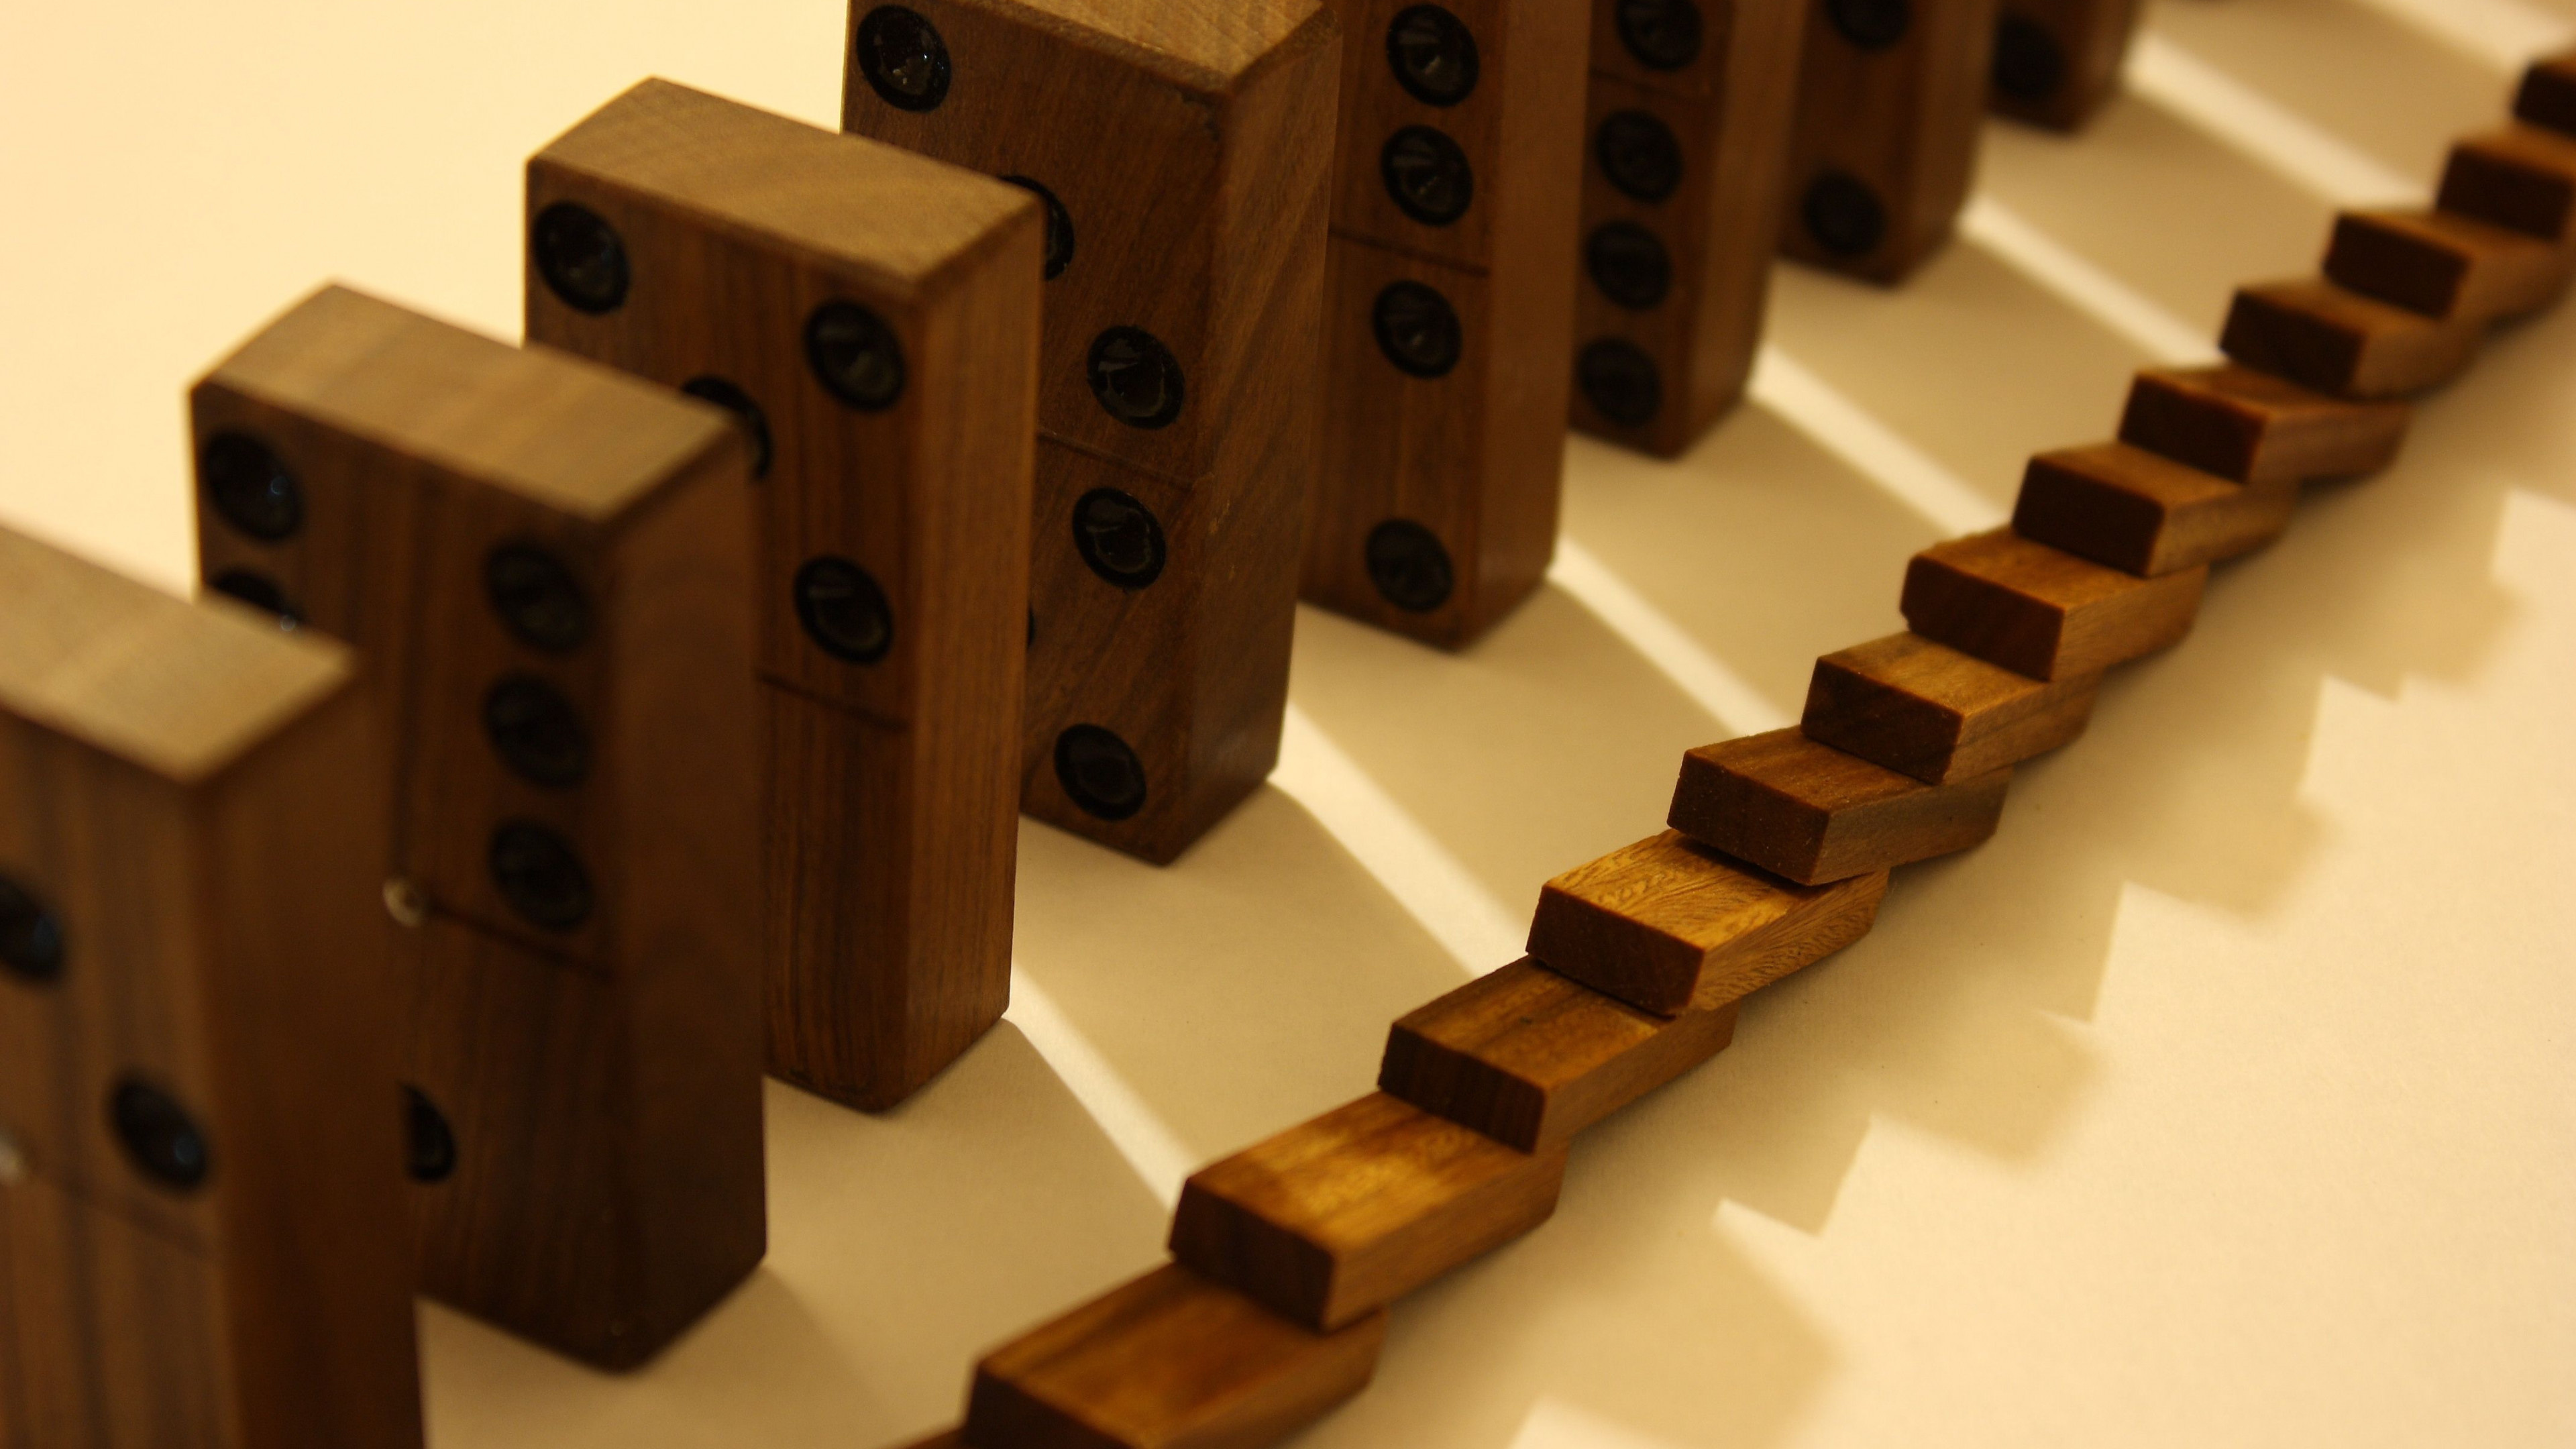 Dominoes: The wooden tiles used in a popular board game with a long history, Indoor game. 3840x2160 4K Wallpaper.